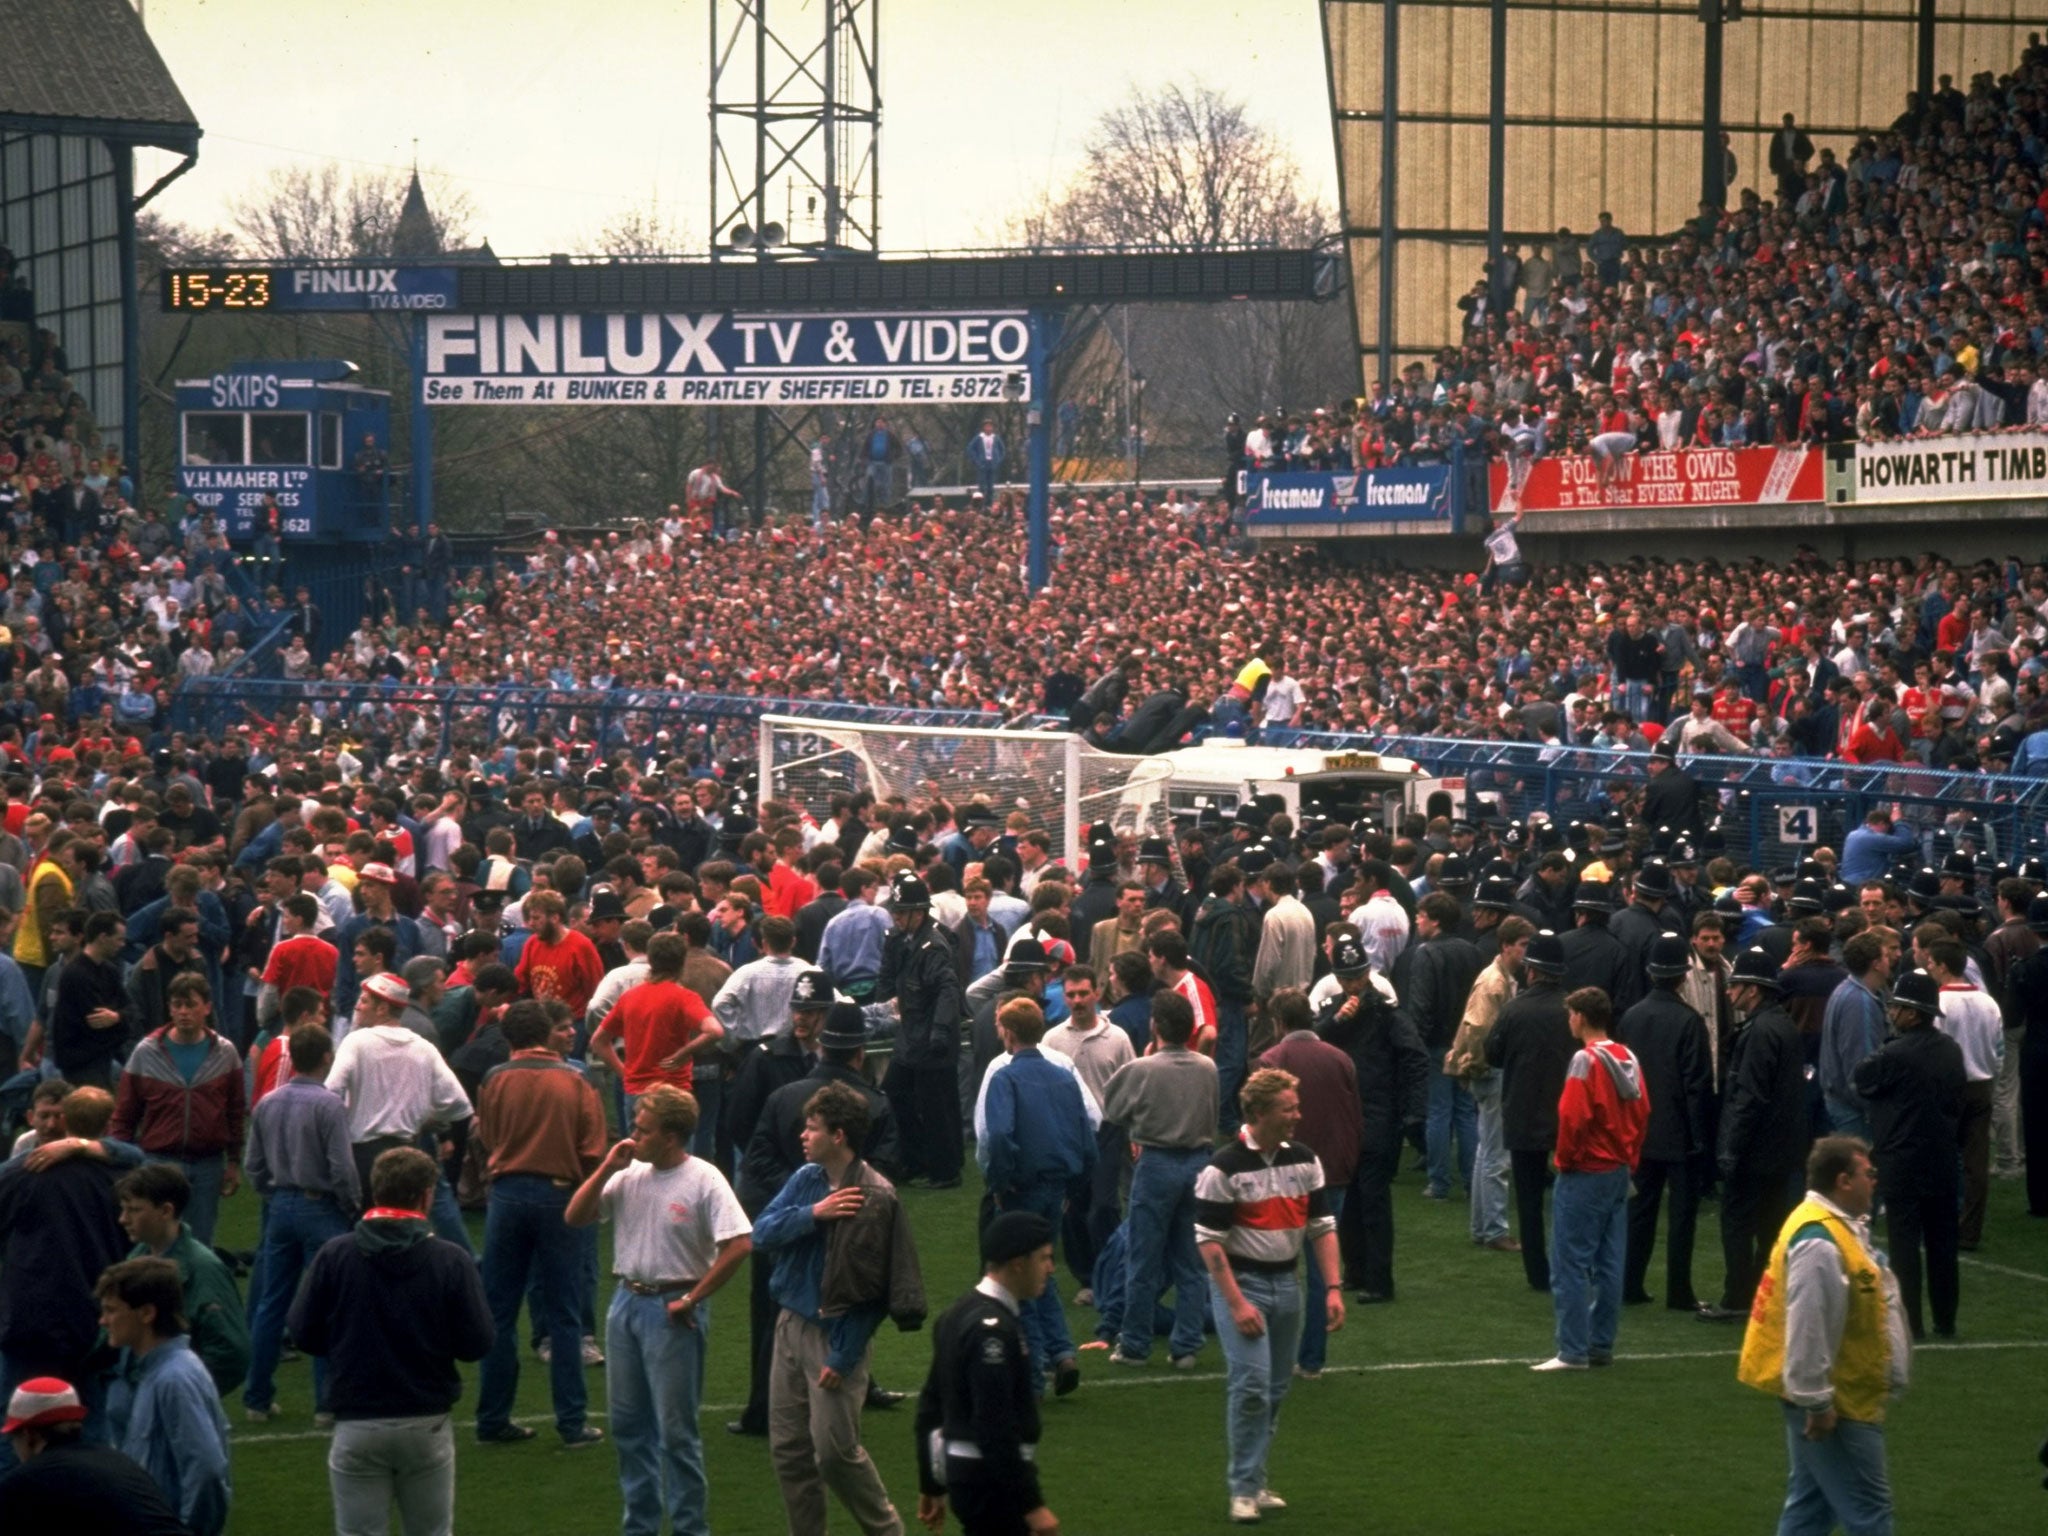 The criminal investigation into the Hillsborough disaster is being boosted by reinforcements from police forces across the country